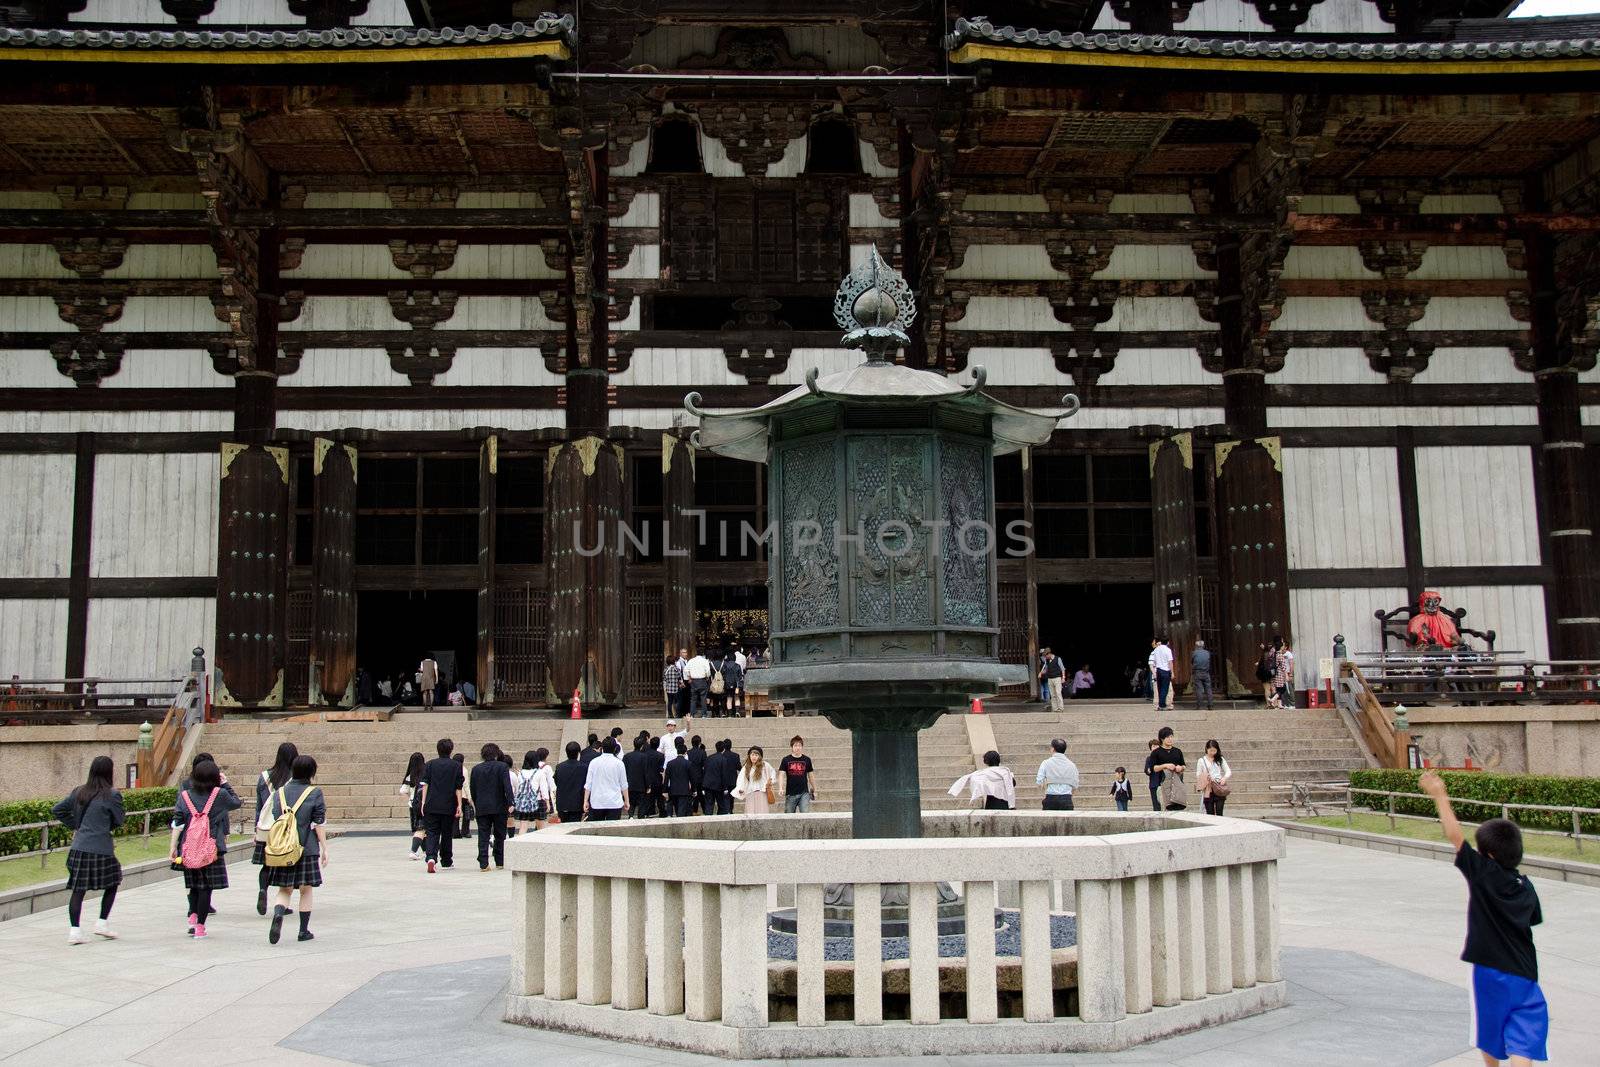 Entrance doors and lantern in front of the Great Buddha Hall, daibutsuden, of the Todai-ji buddhist temple in Nara, Japan